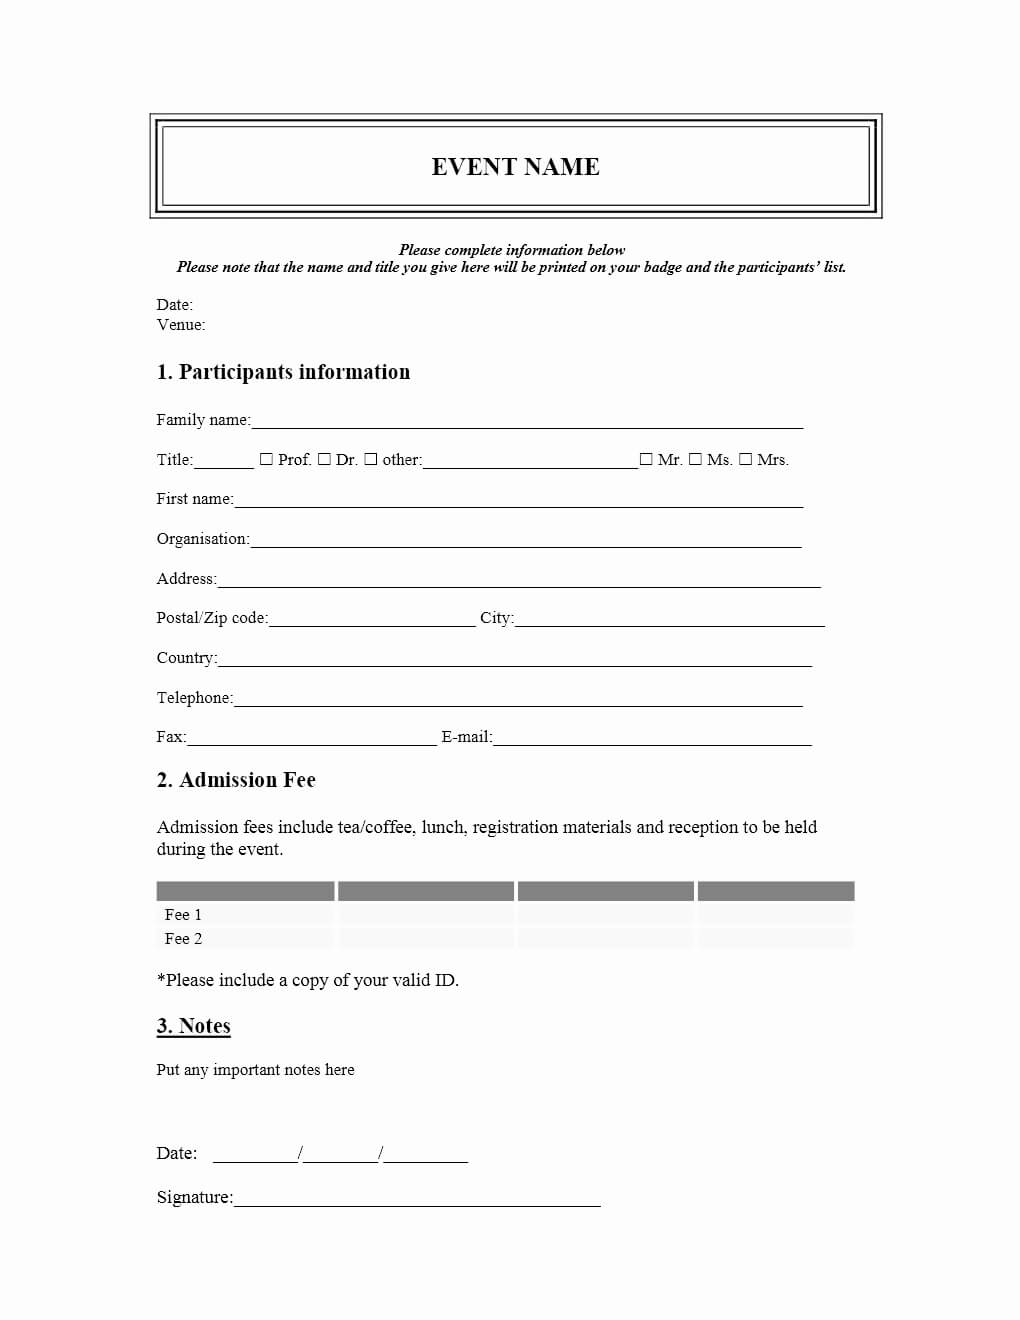 Conference Registration Form Template Word Lovely Event Inside Seminar Registration Form Template Word